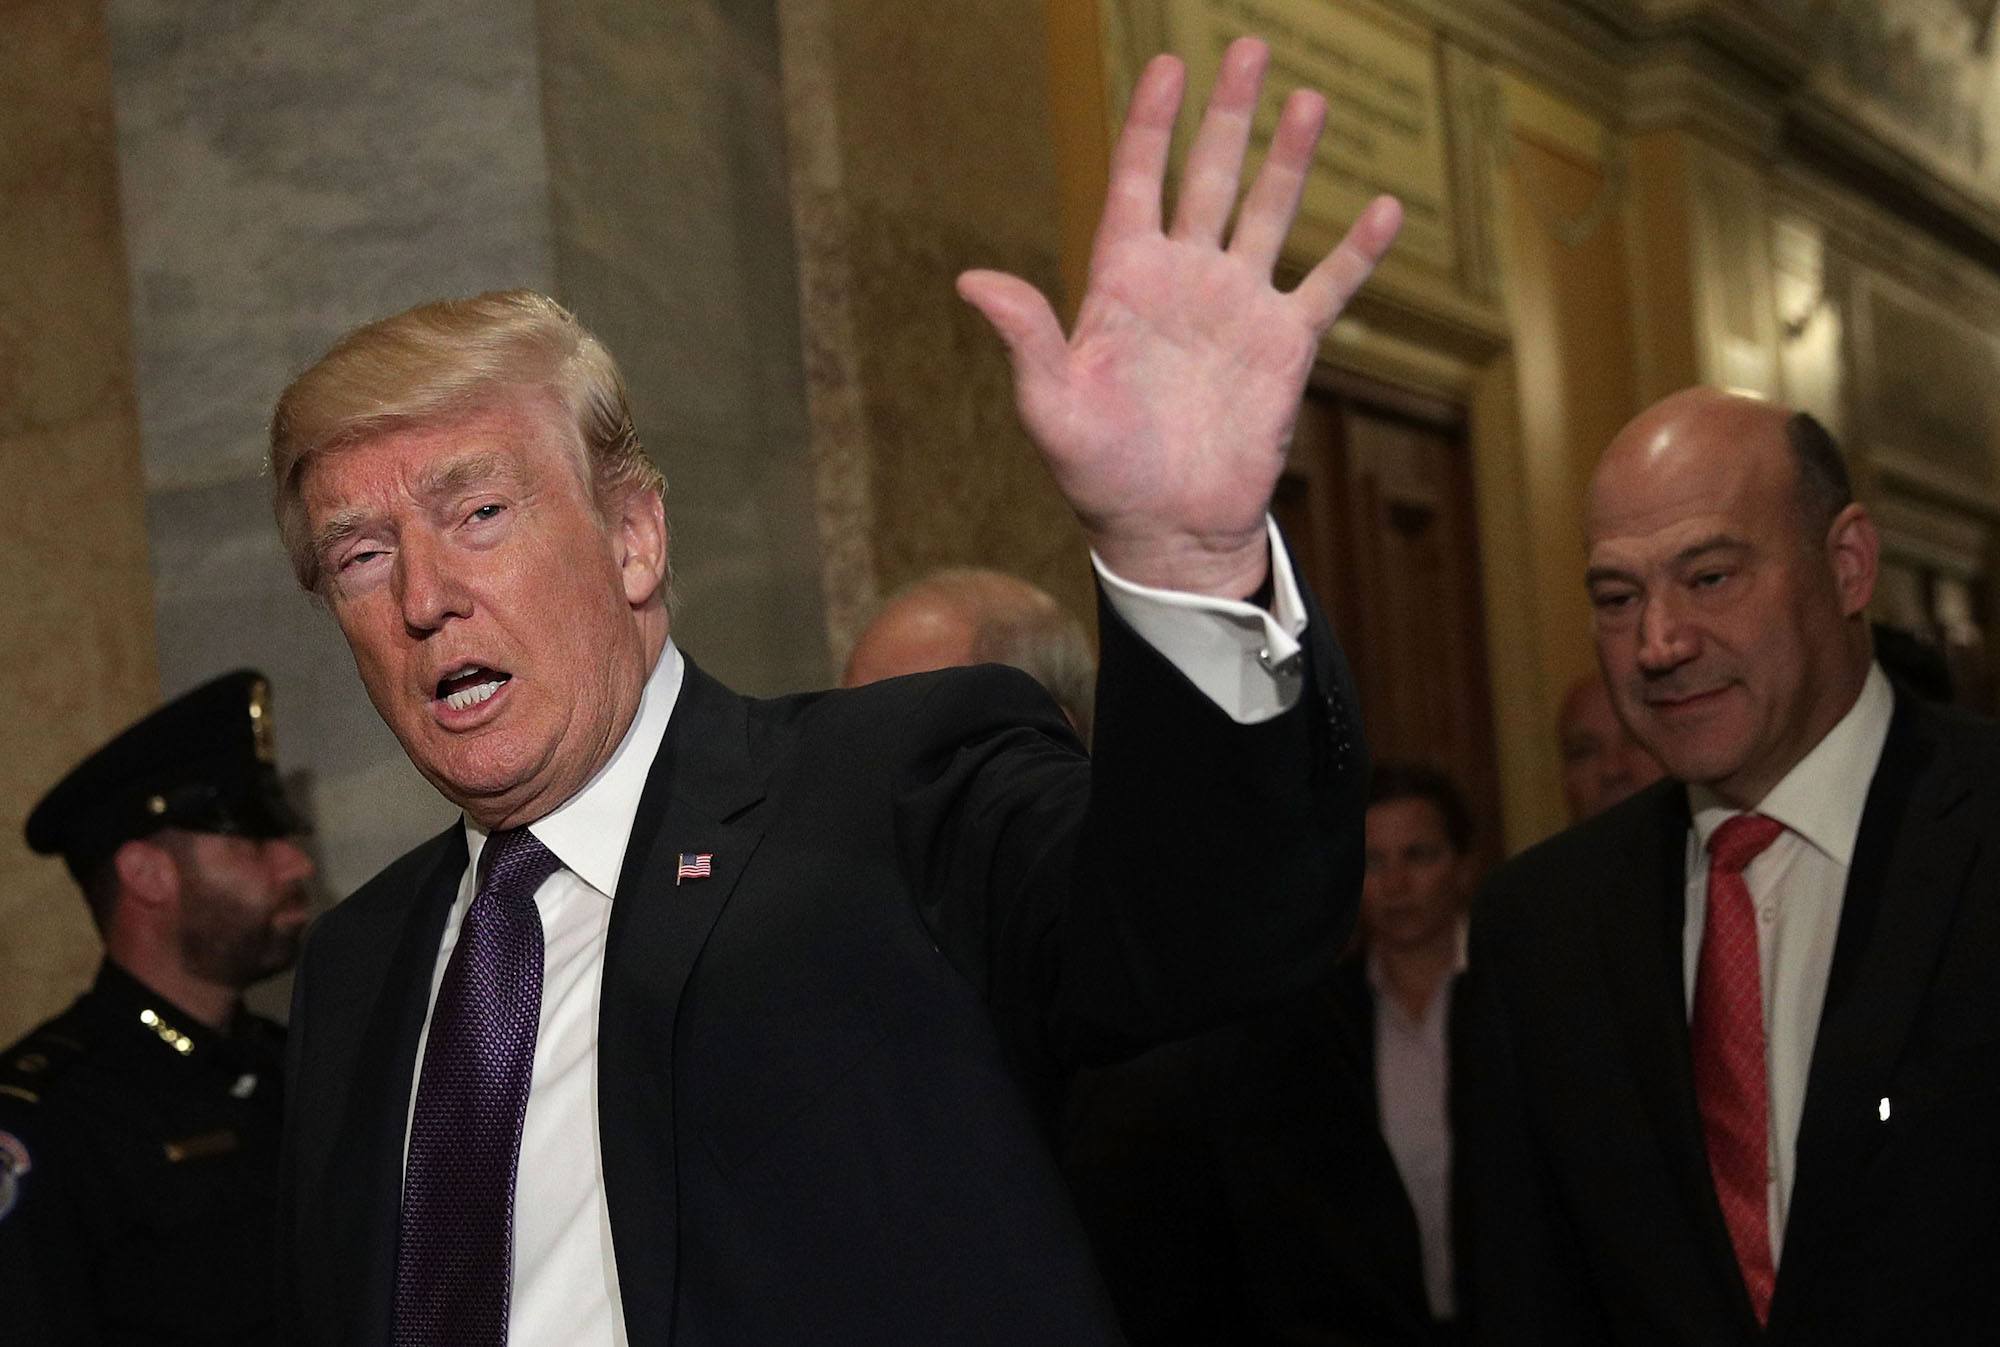 Donald Trump waves as he arrives at the Capitol